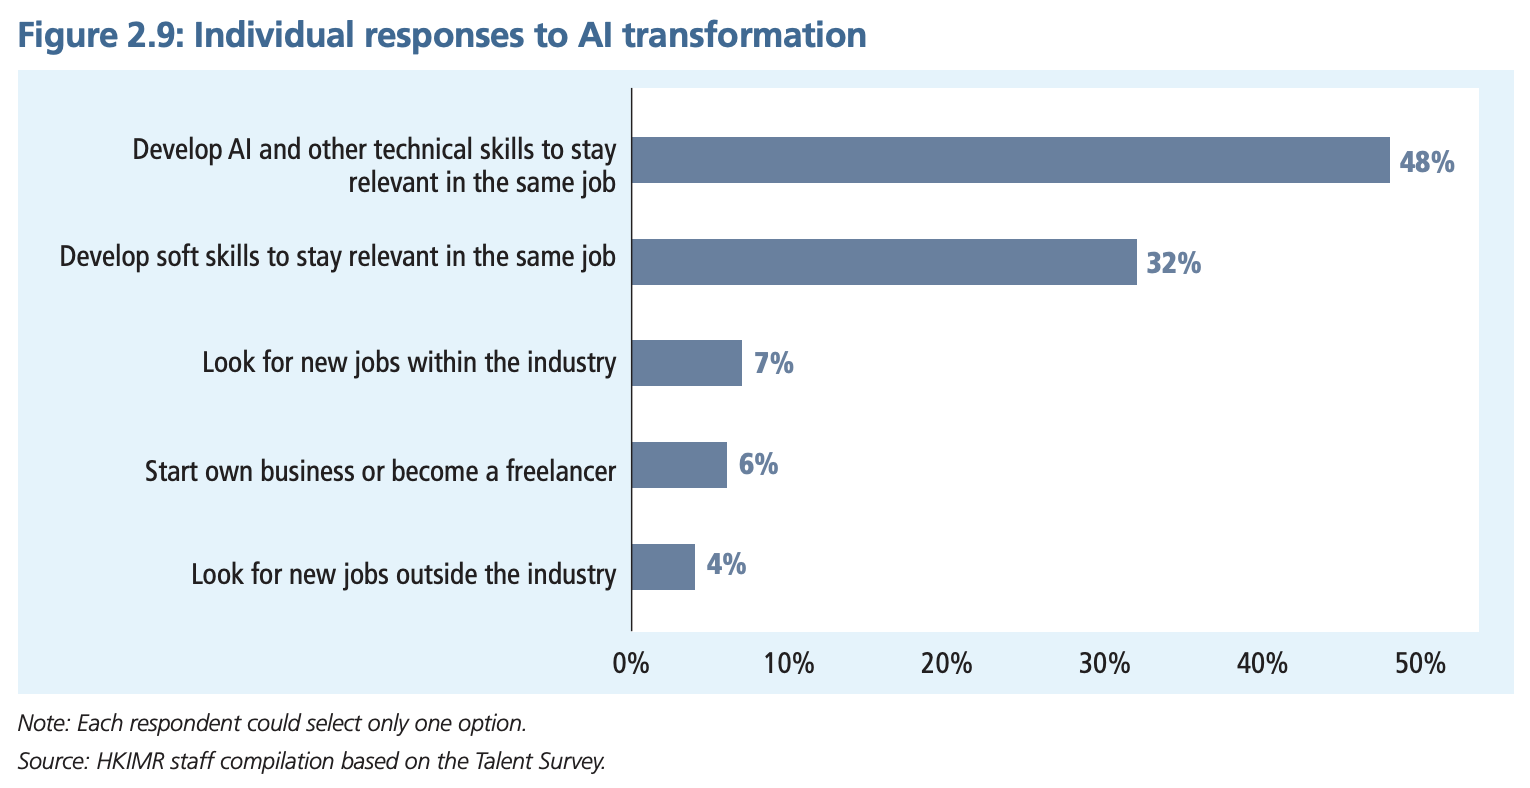 Individual responses to AI transformation, Source: Advancing Talent Development in Financial Services: Emerging Global Trends and Their Impact on Hong Kong